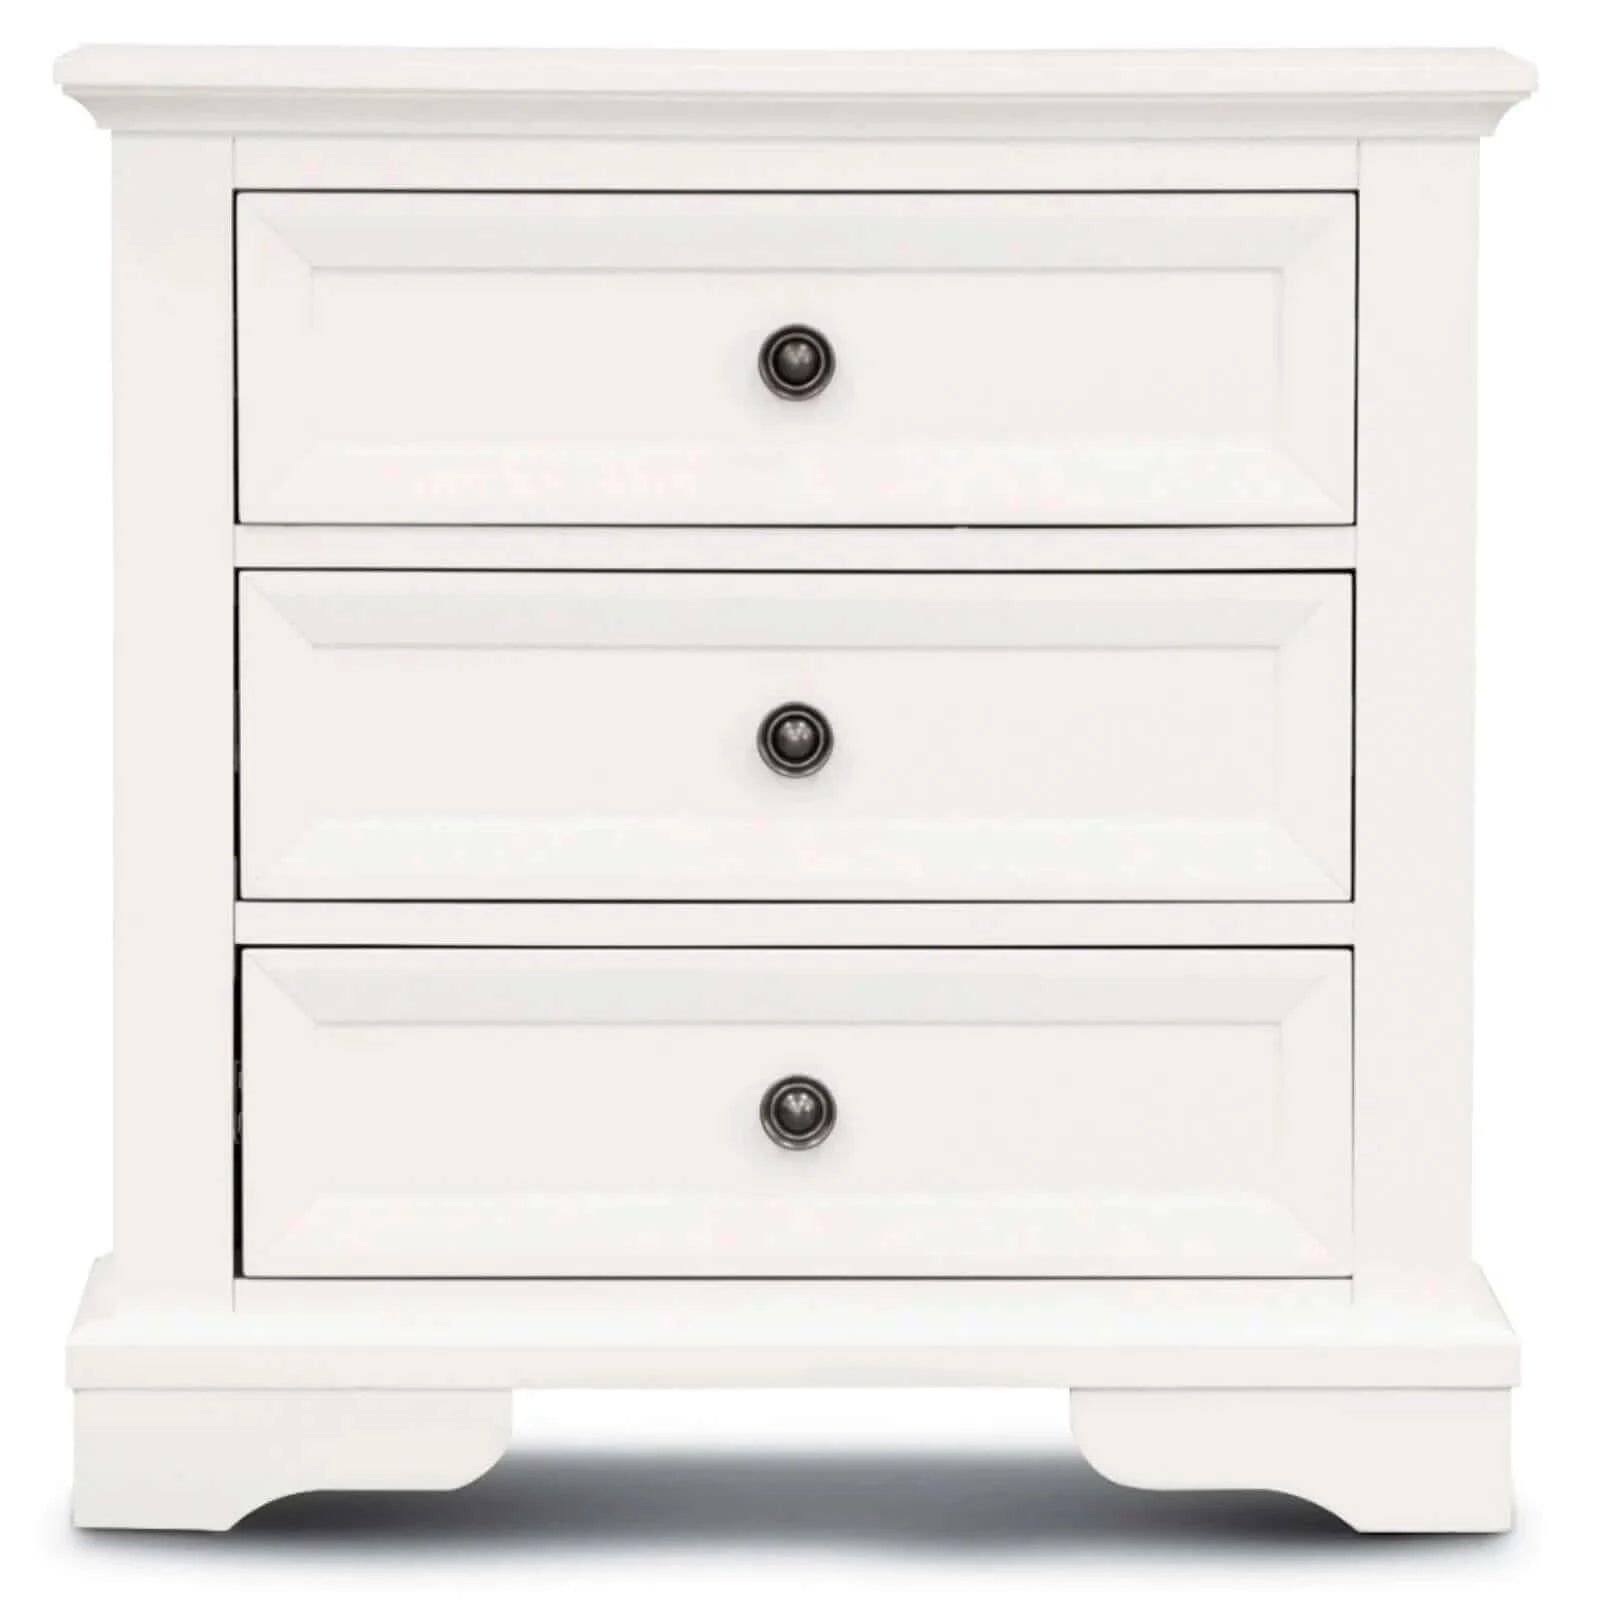 Buy celosia bedside table 3 drawers storage cabinet nightstand end tables - white - upinteriors-Upinteriors